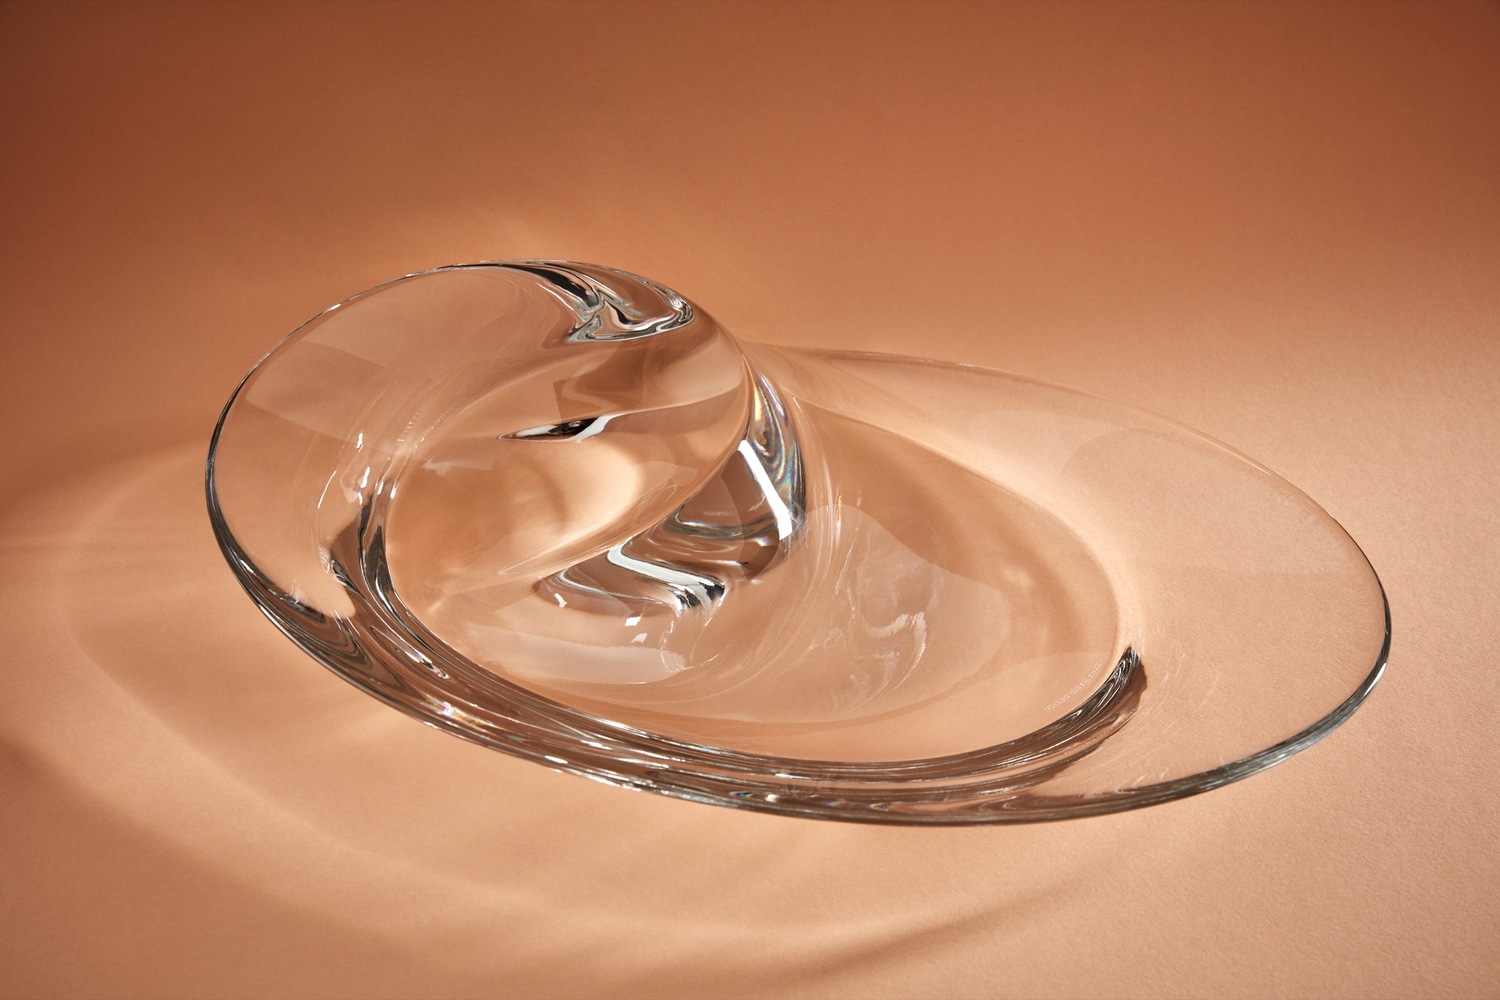 The sculptural "Swirl Bowl" featured in Zaha Hadid Design's new kitchenware collection.